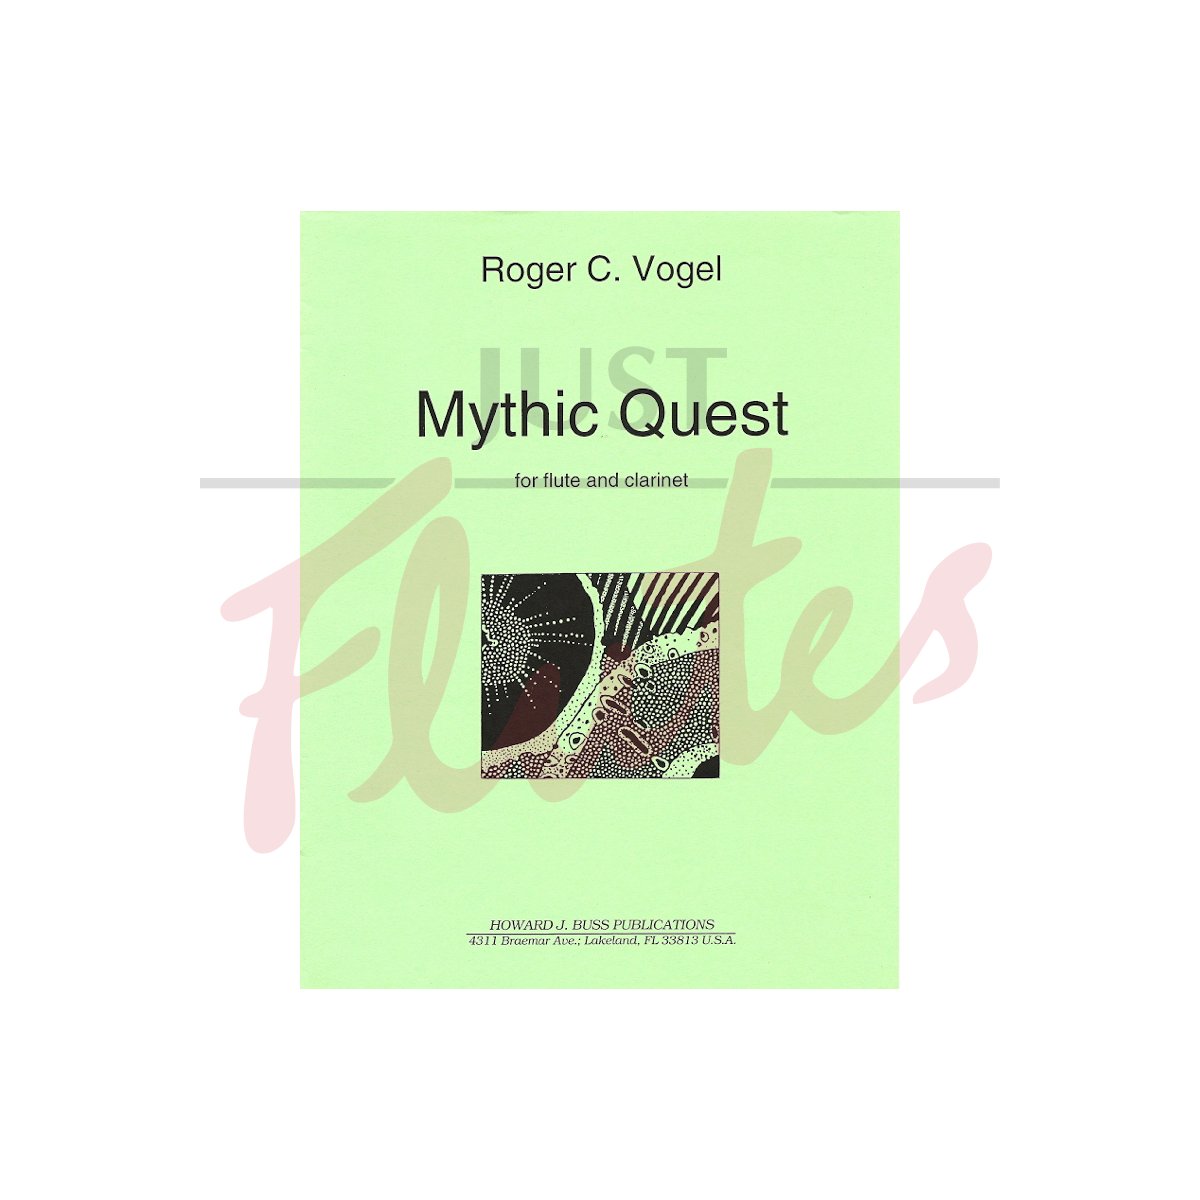 Mythic Quest [Flute and Clarinet]